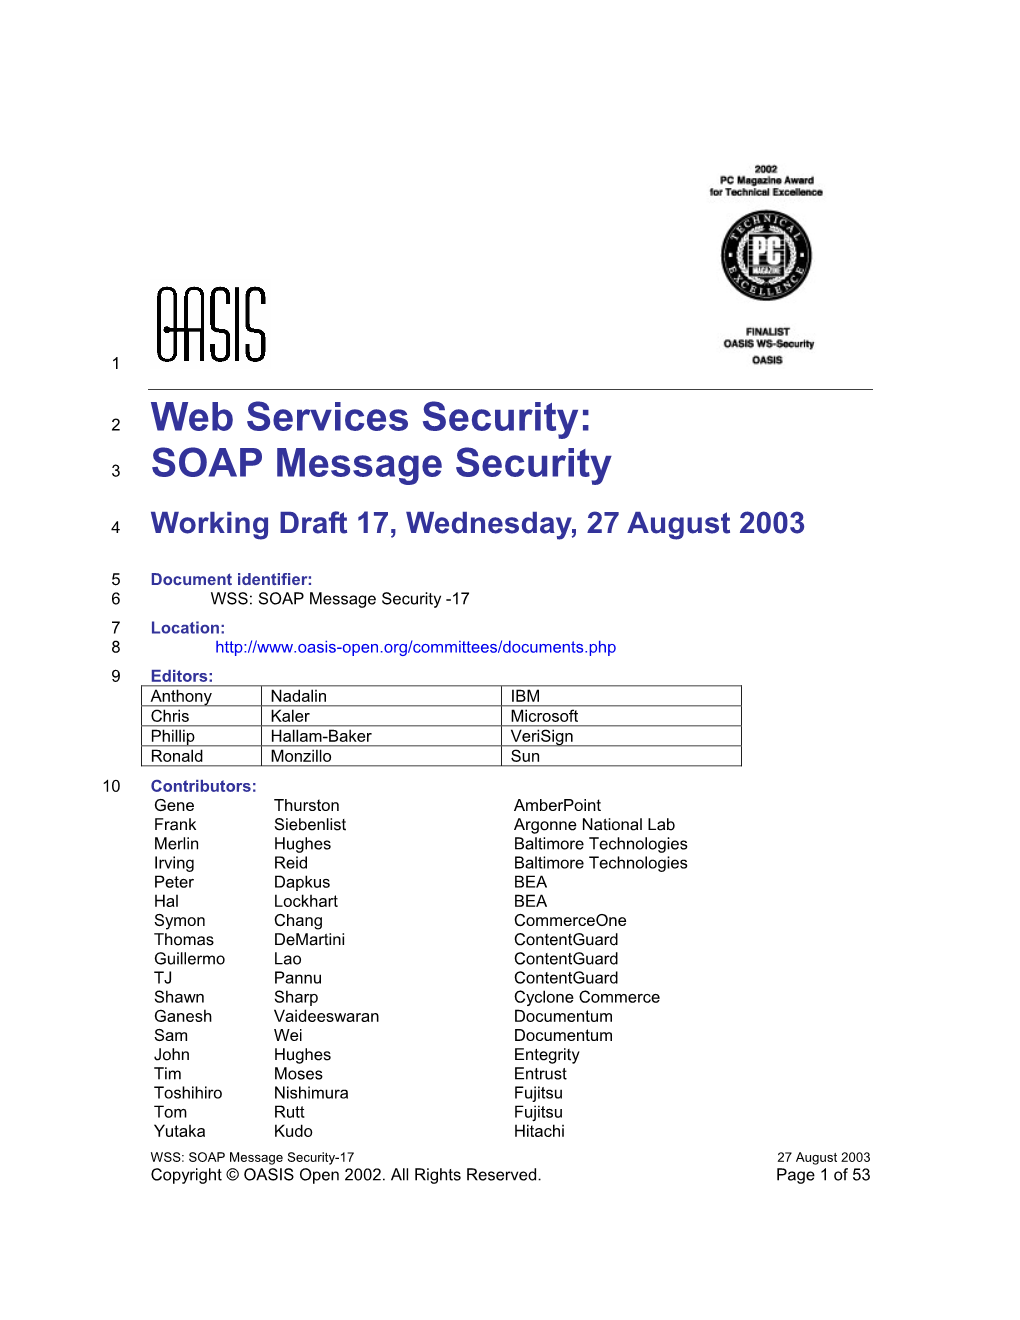 SOAP Message Security